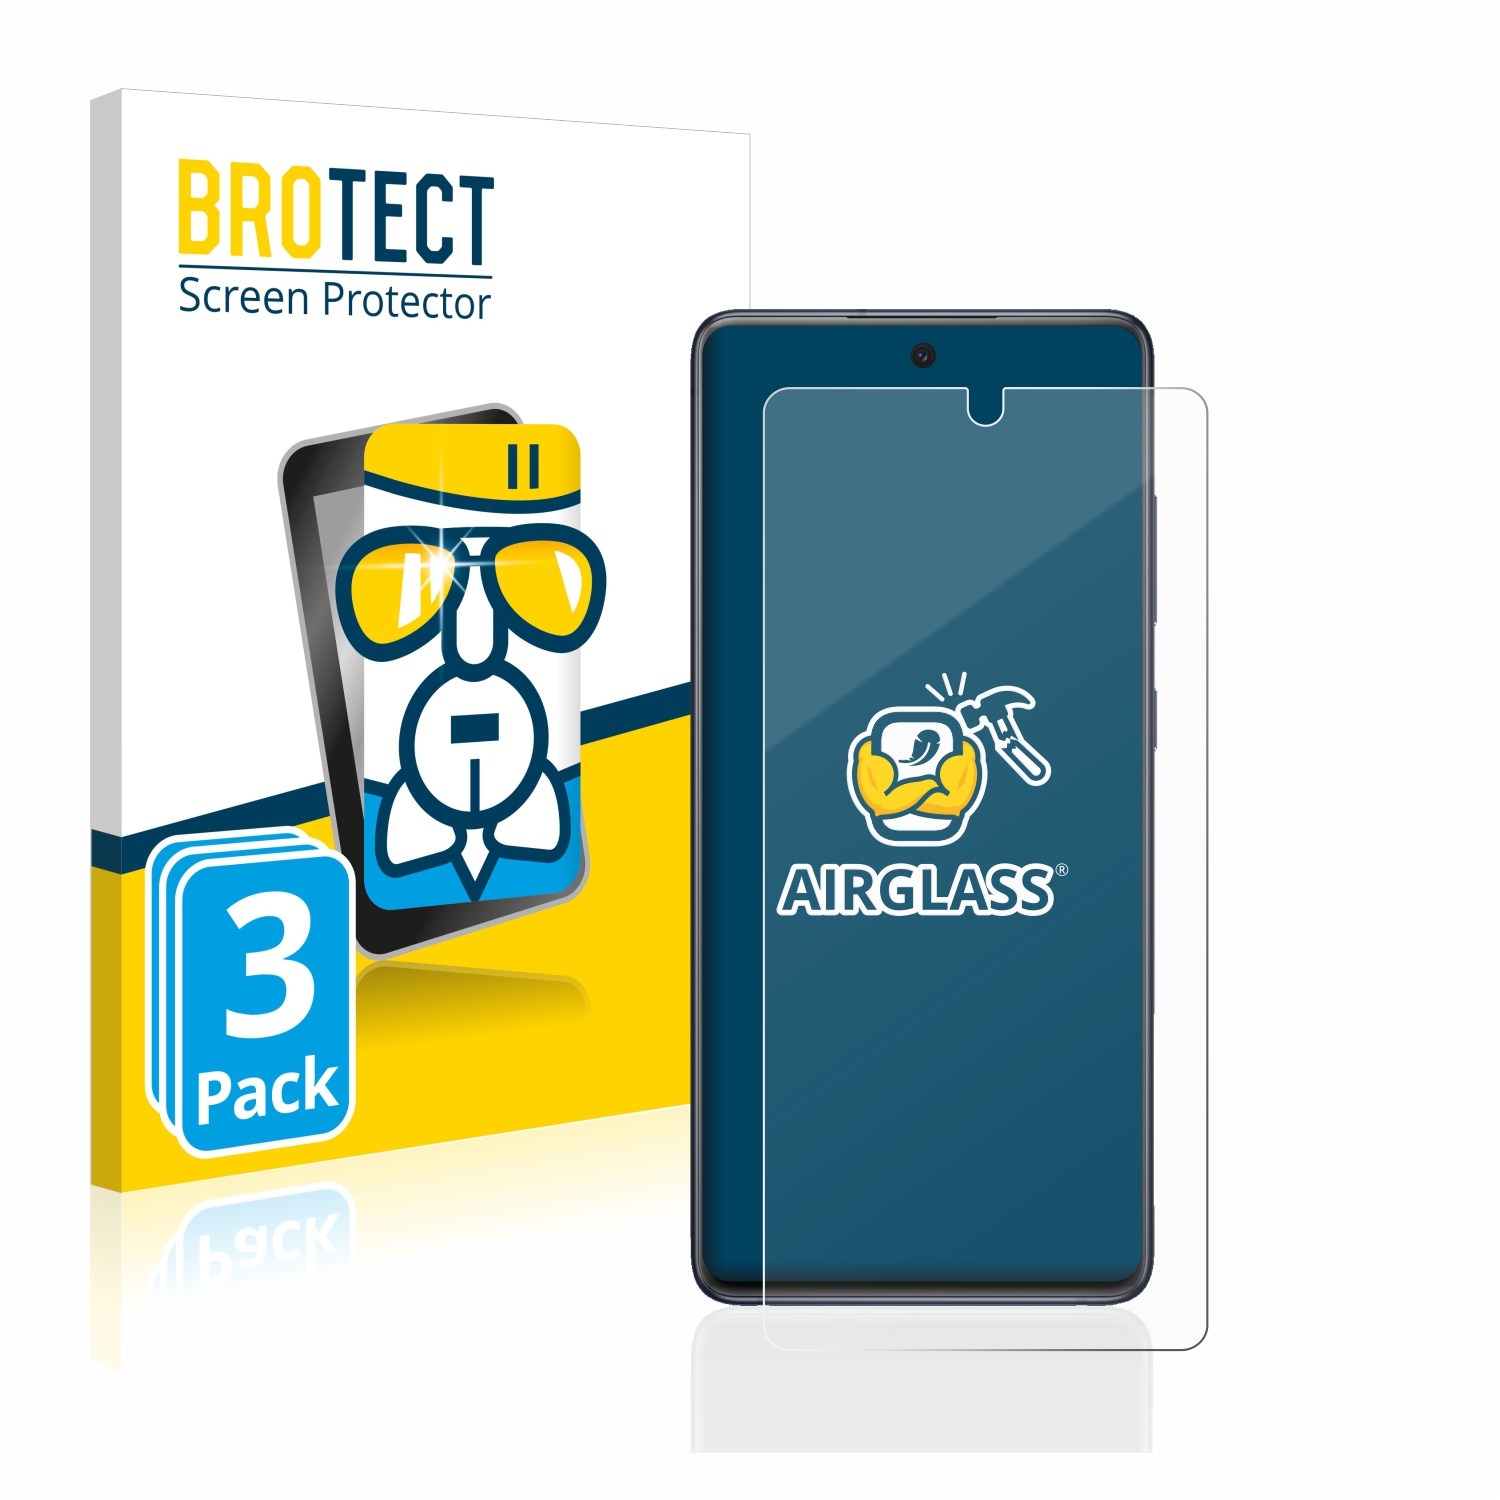 2x BROTECT Protective Film for Chuwi V10HD 3G Clear Screen Protector Clear 